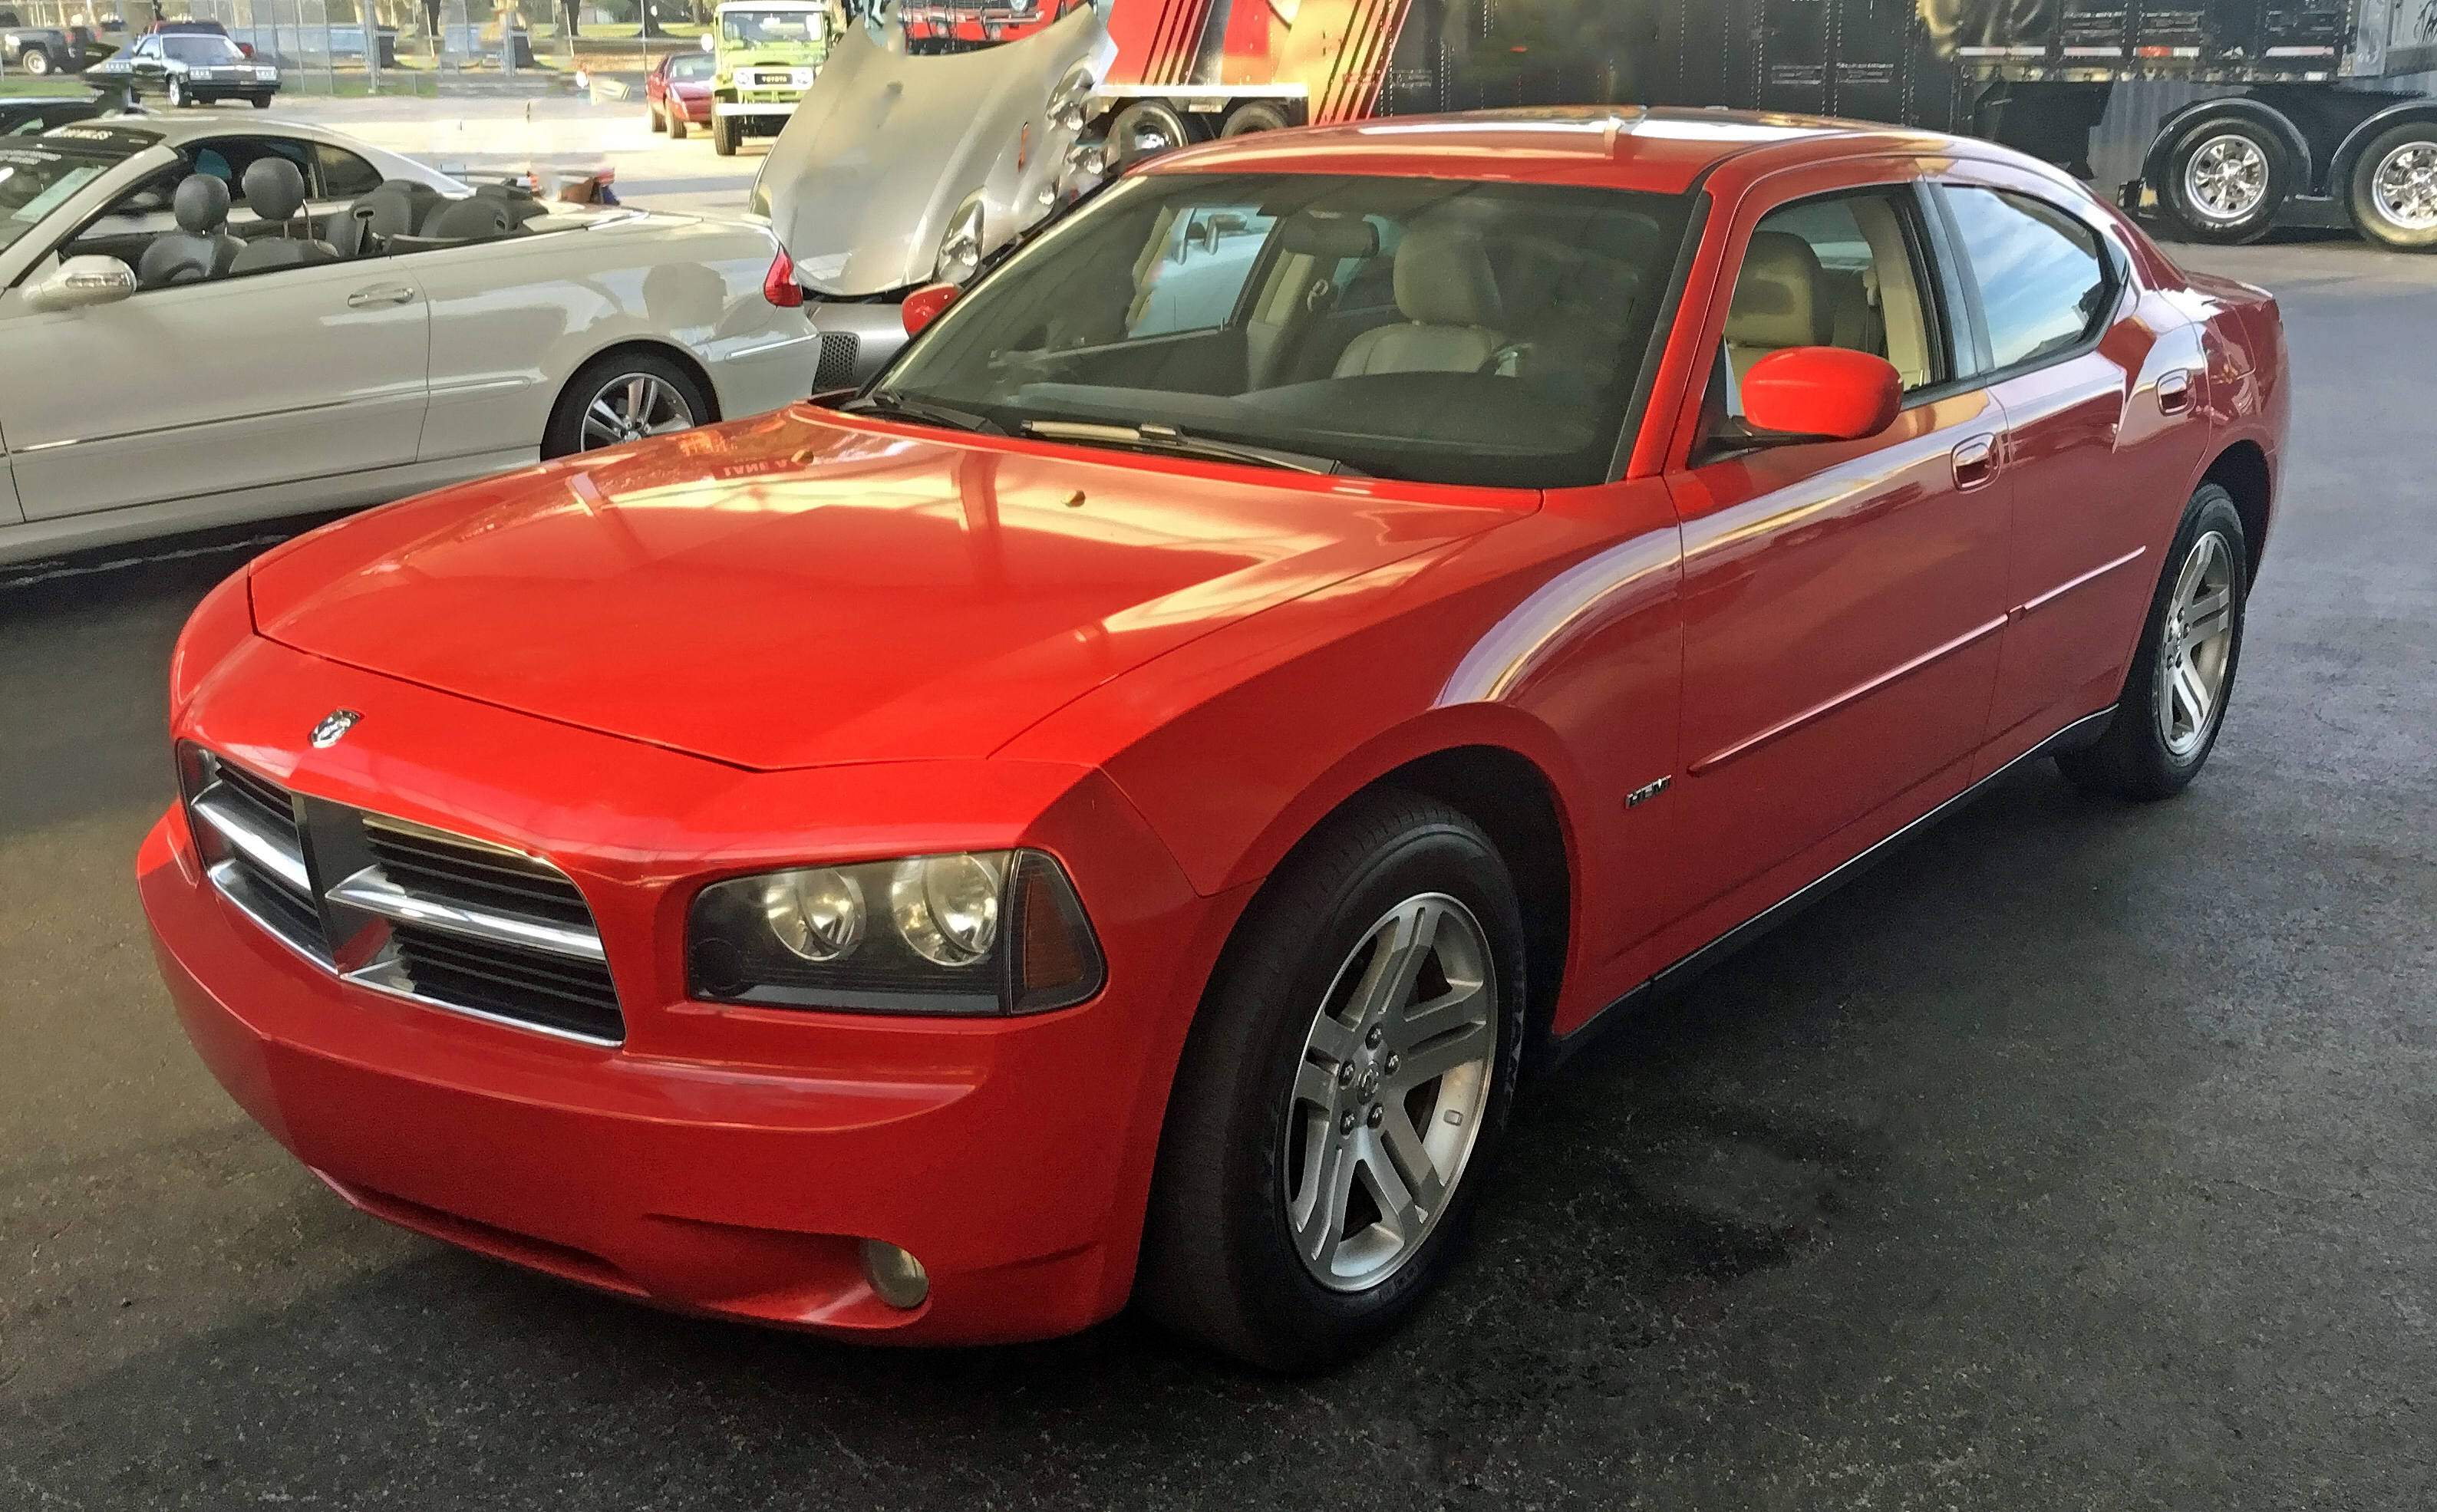 2008 Dodge Charger Daytona R/T Values | Hagerty Valuation Tool®